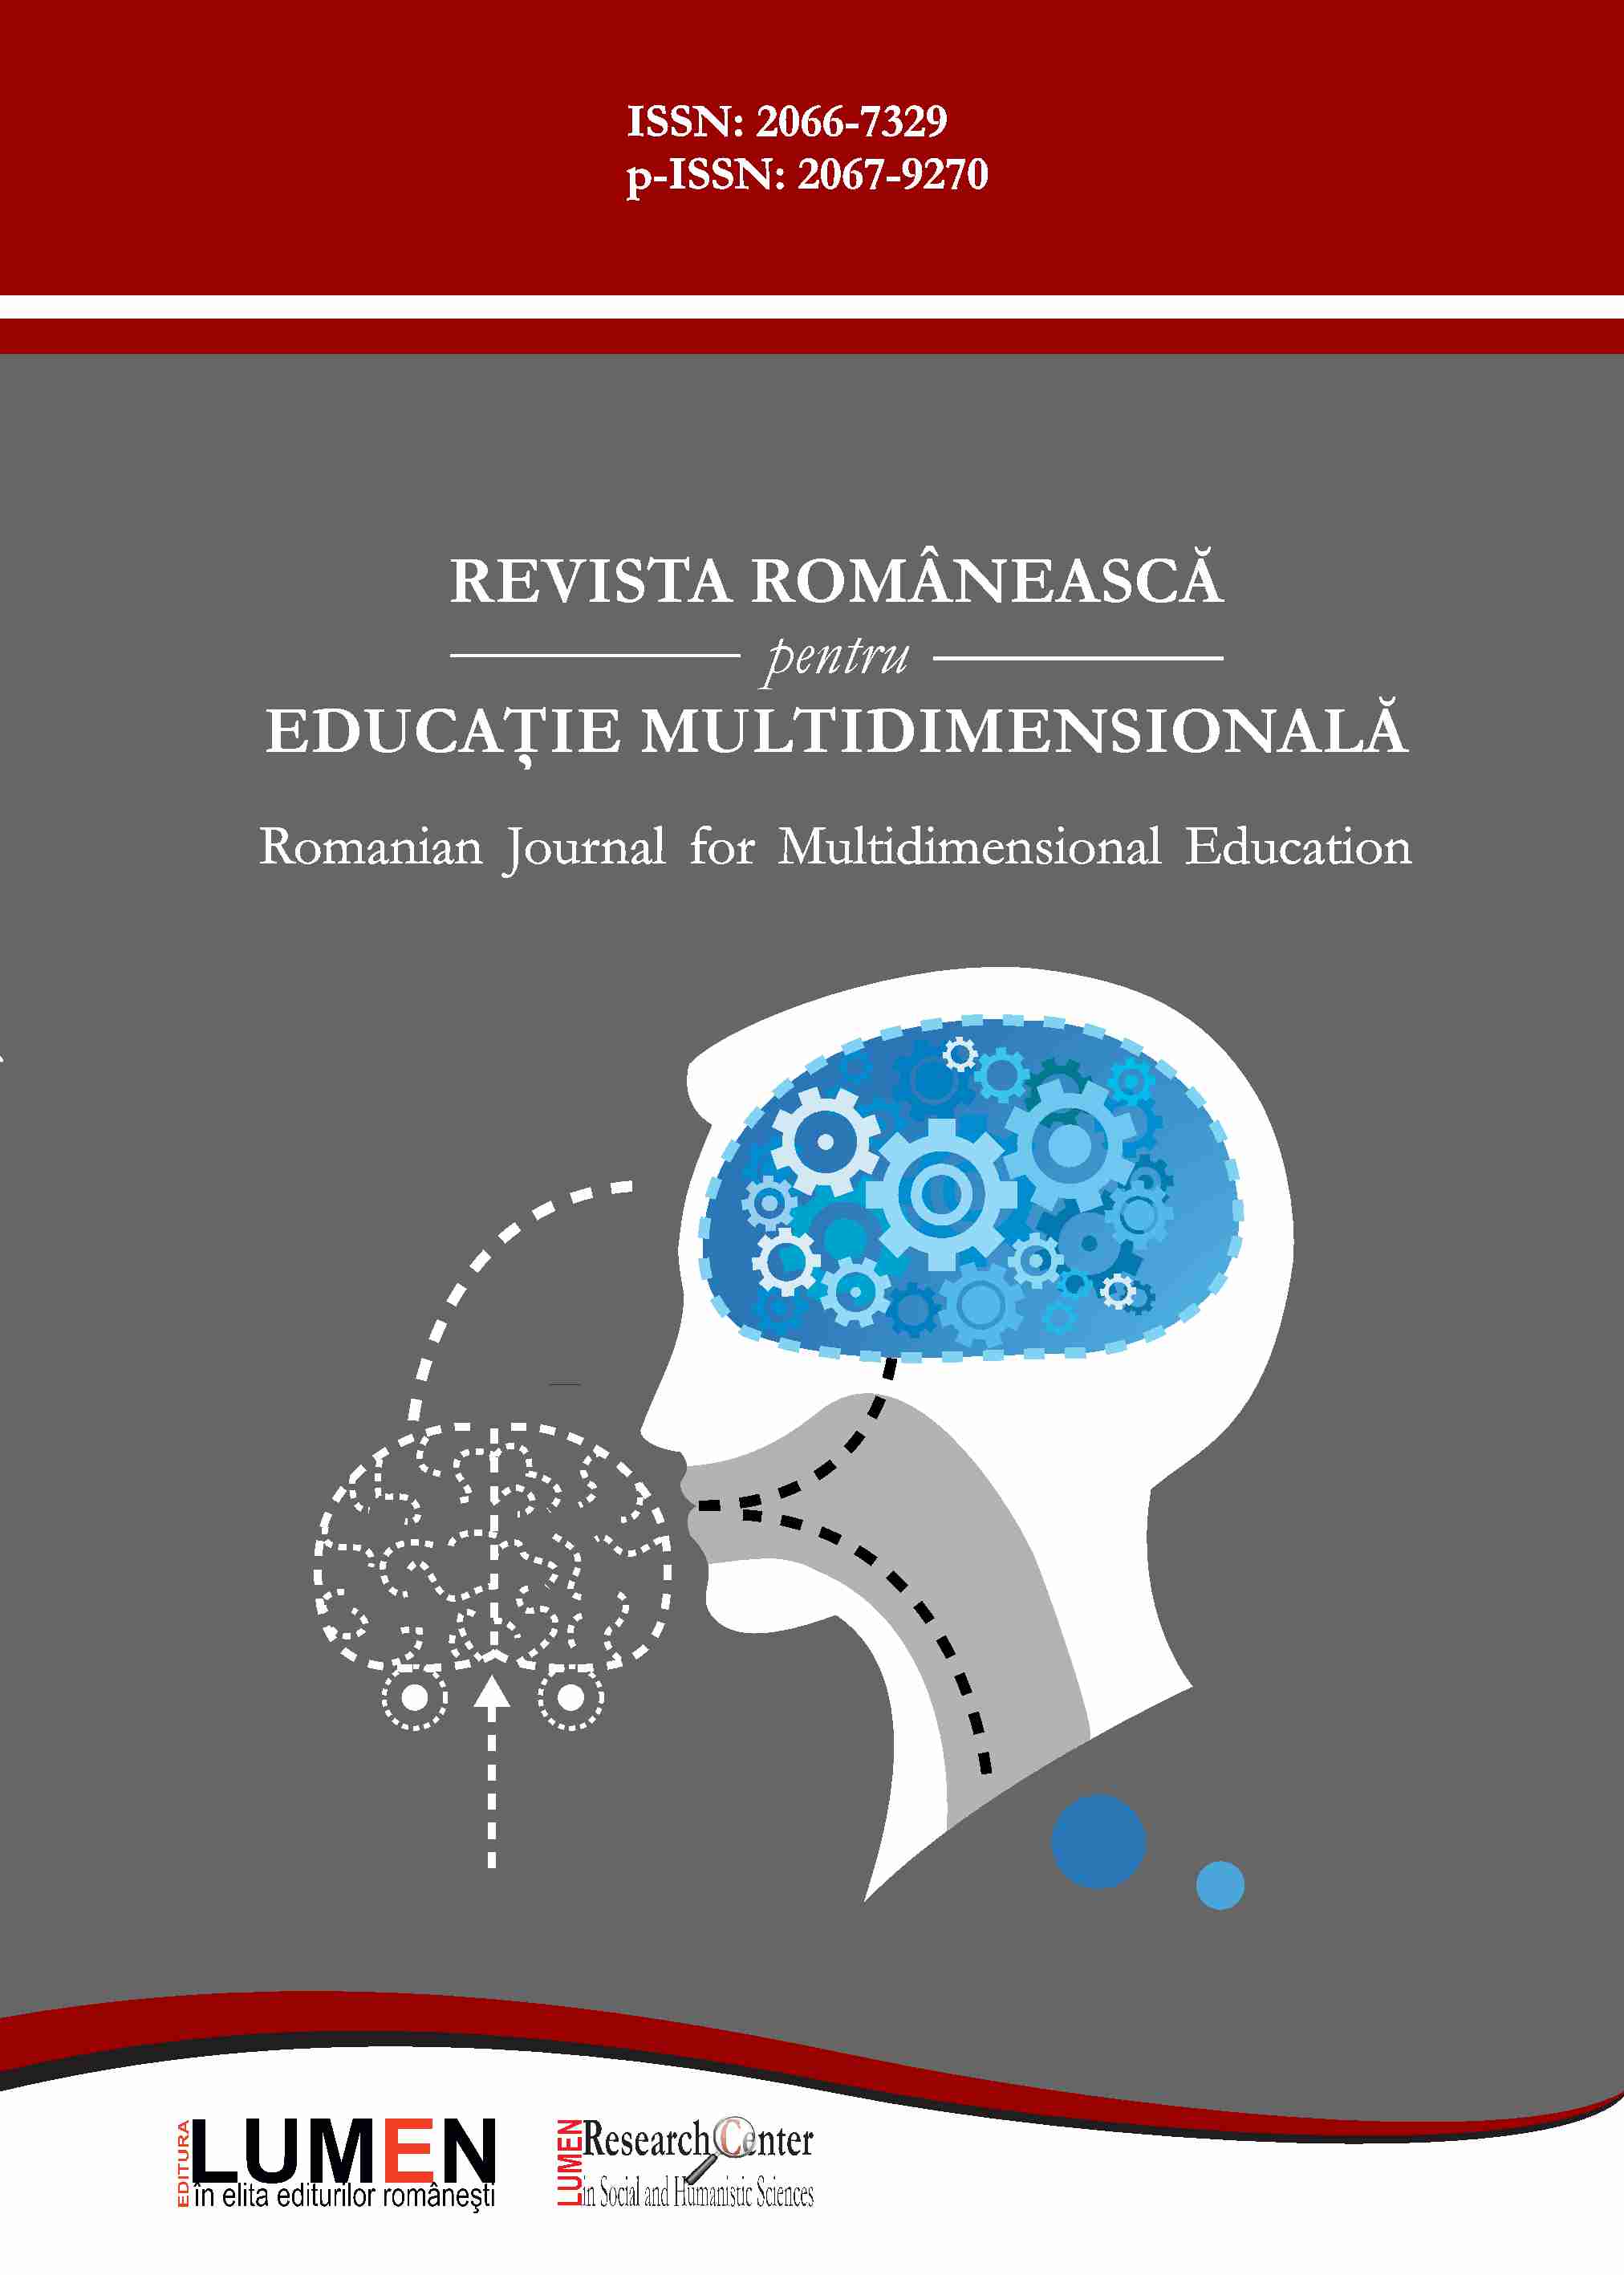 Transdisciplinarity and Communicative Action in Multidimensional Education. Editorial Cover Image